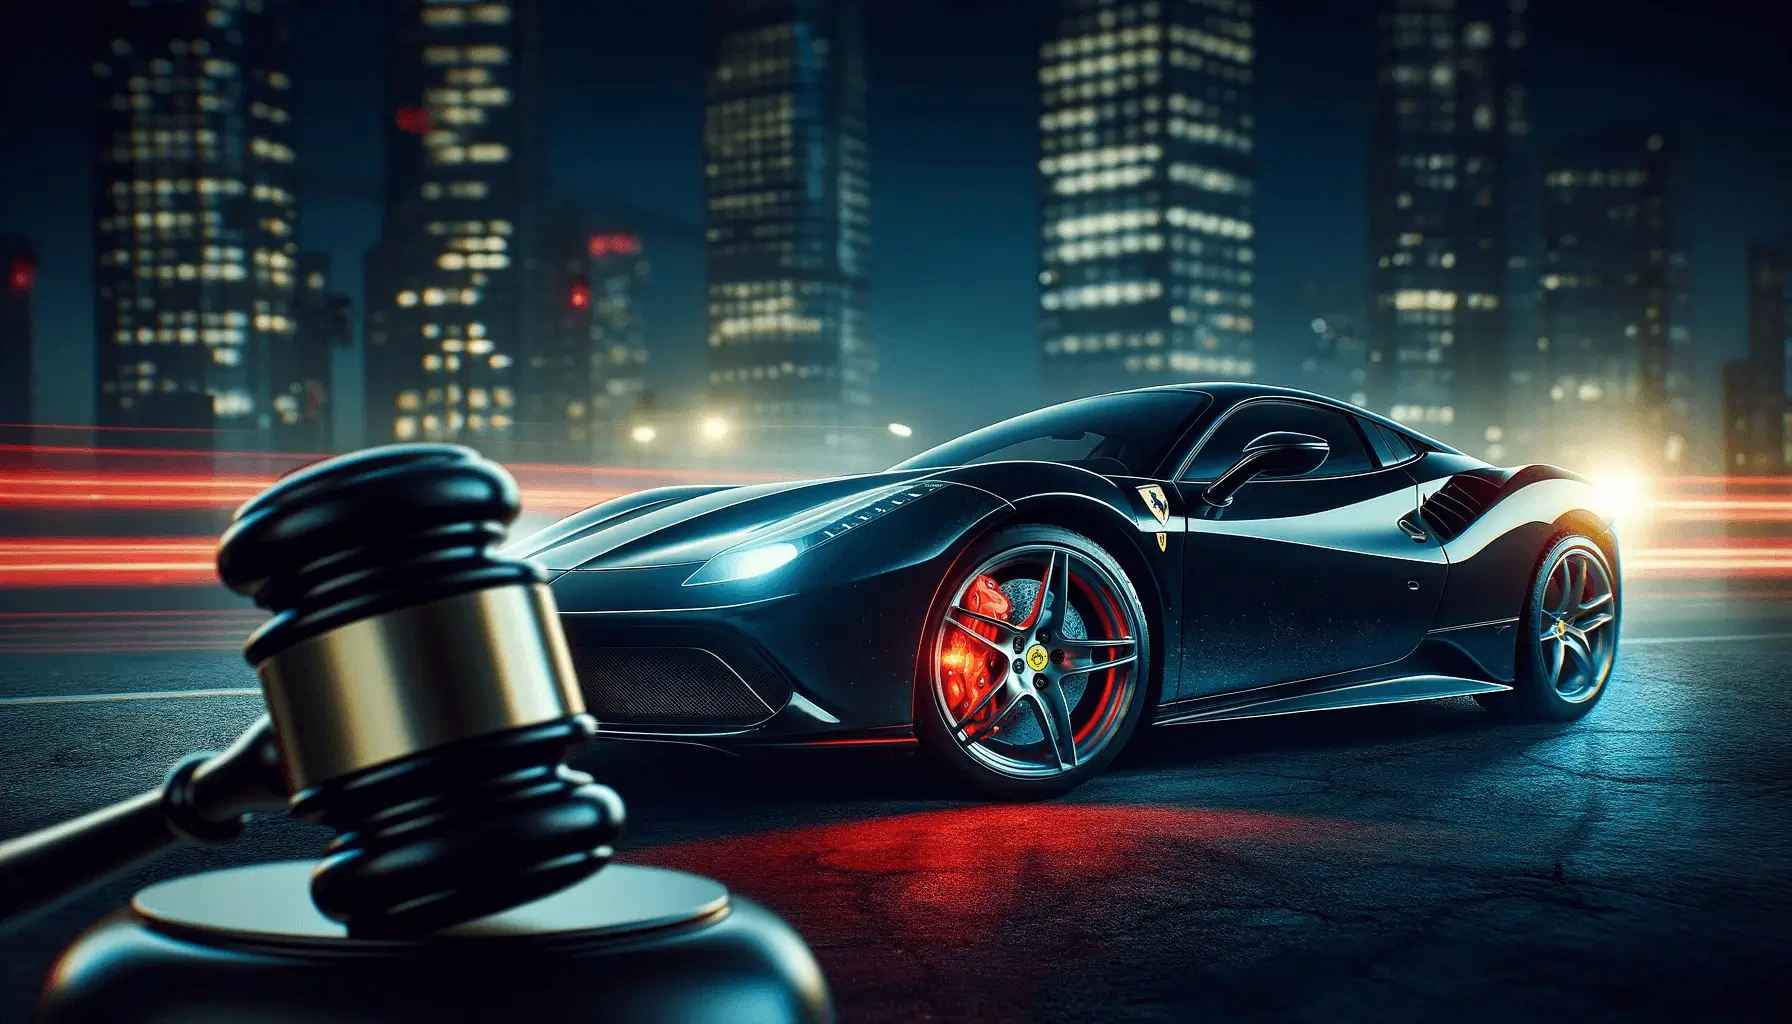 Banner depicting a dark Ferrari with highlighted brakes indicating a defect, against a twilight city backdrop with subtle legal symbols, symbolizing the urgency and seriousness of the brake defect lawsuit.